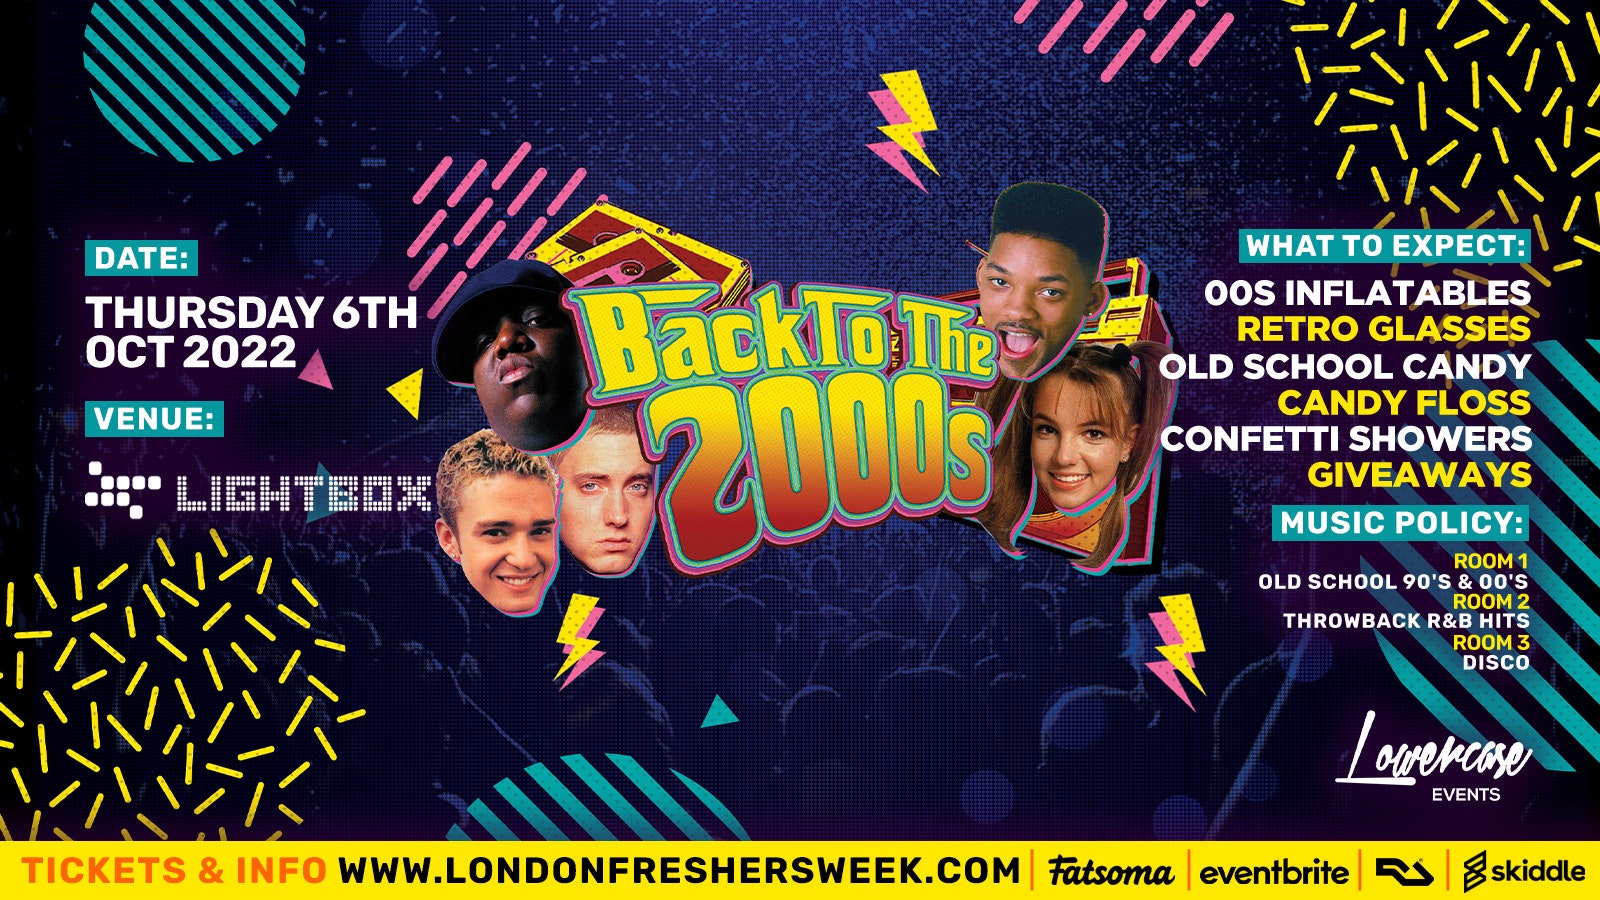 The 90s & 2000s Freshers Party @ Lightbox – The Biggest Freshers Throwback Party – London Freshers Week 2022 – [WEEK 3]